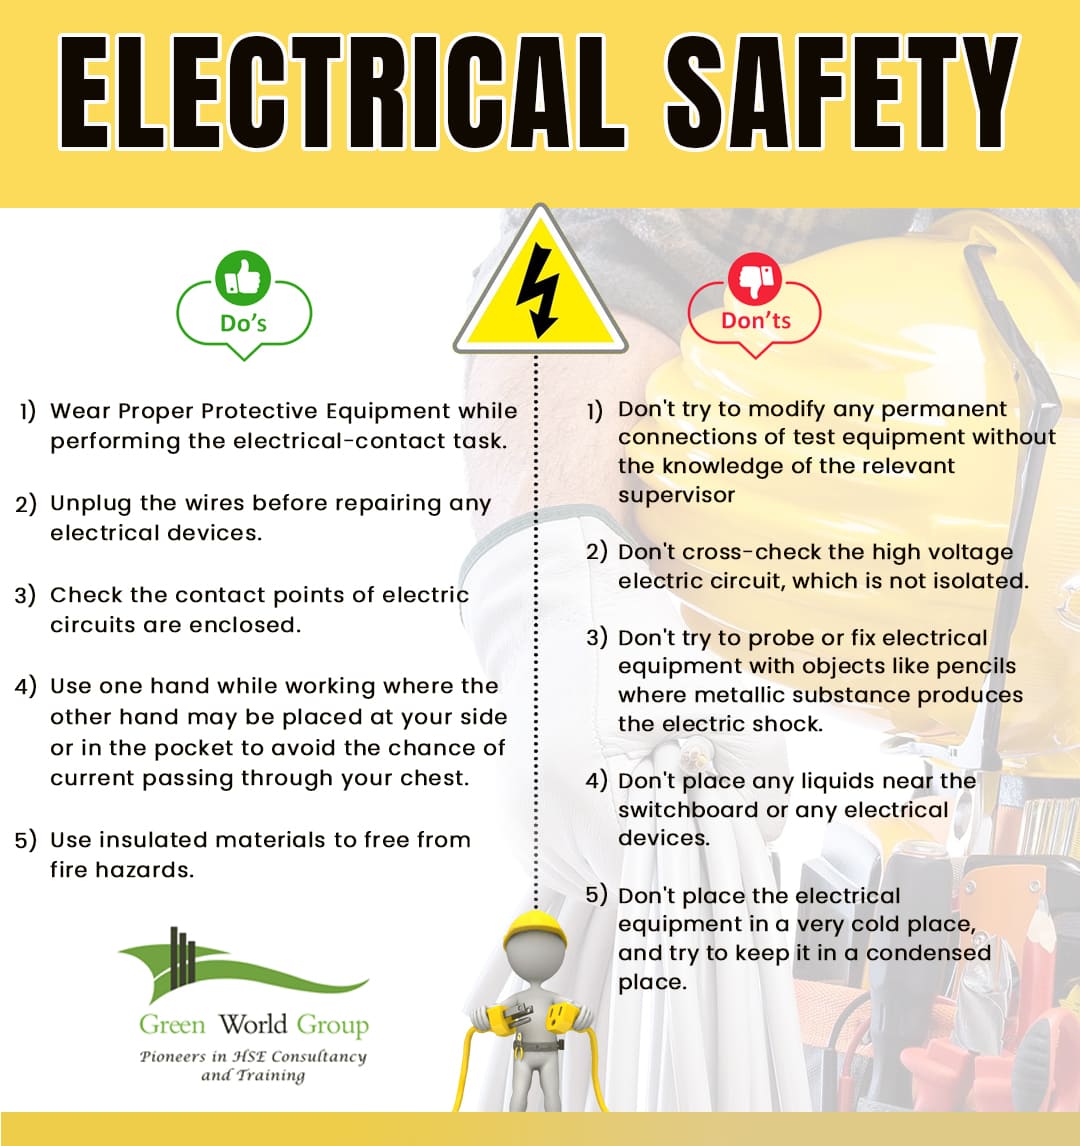 Electrical Safety 1 1 